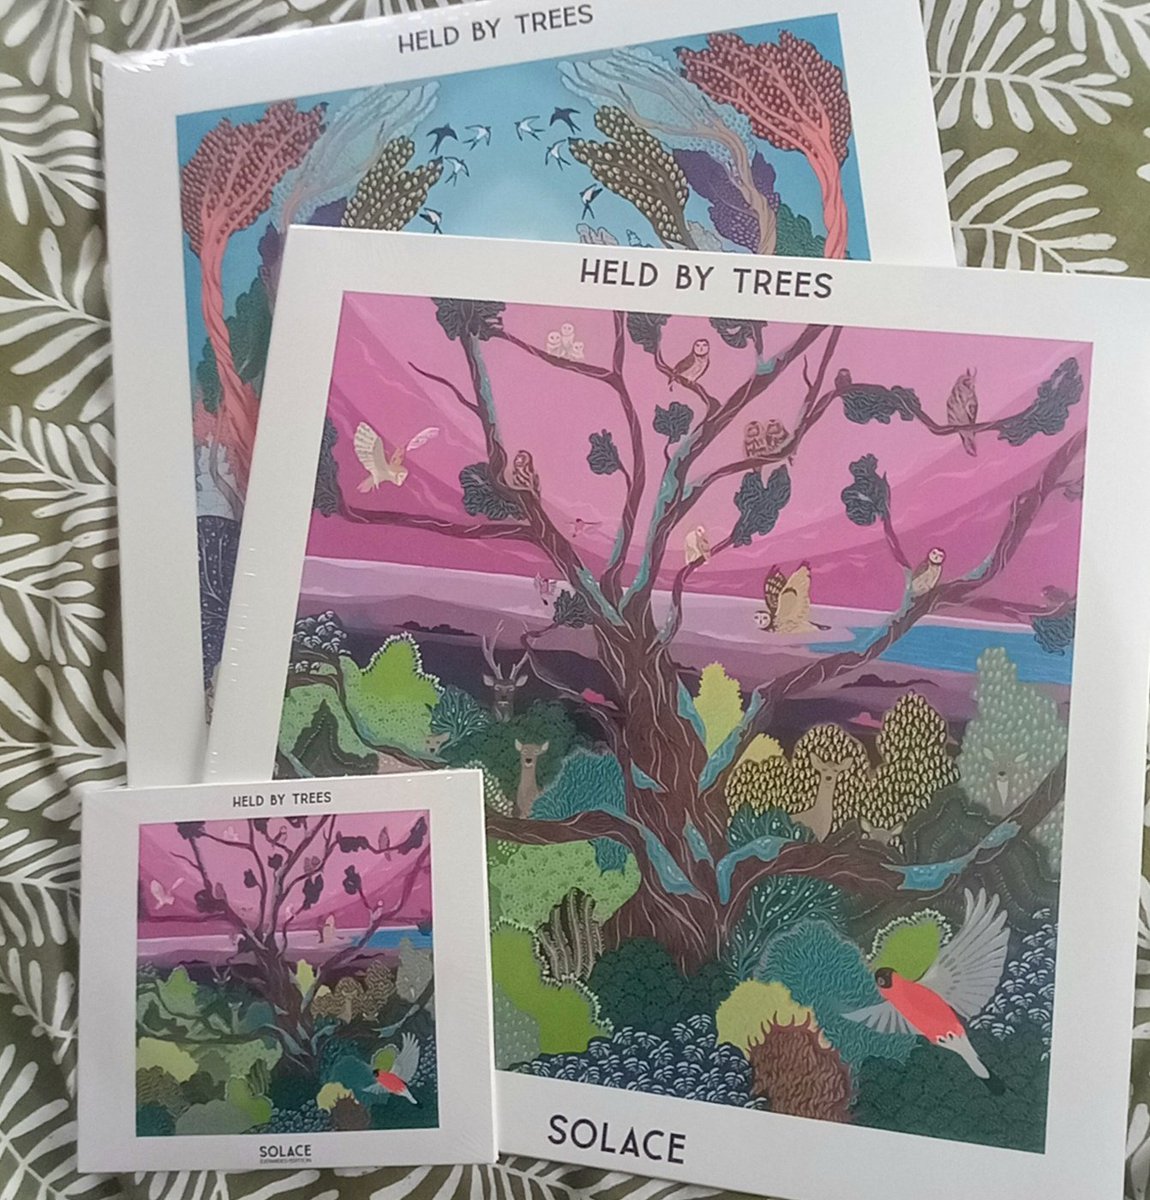 Happy to receive these beautiful records by @heldbytrees. Music that consciously evokes the sound and spirit of later Talk Talk, but with its own distinct personality, too.